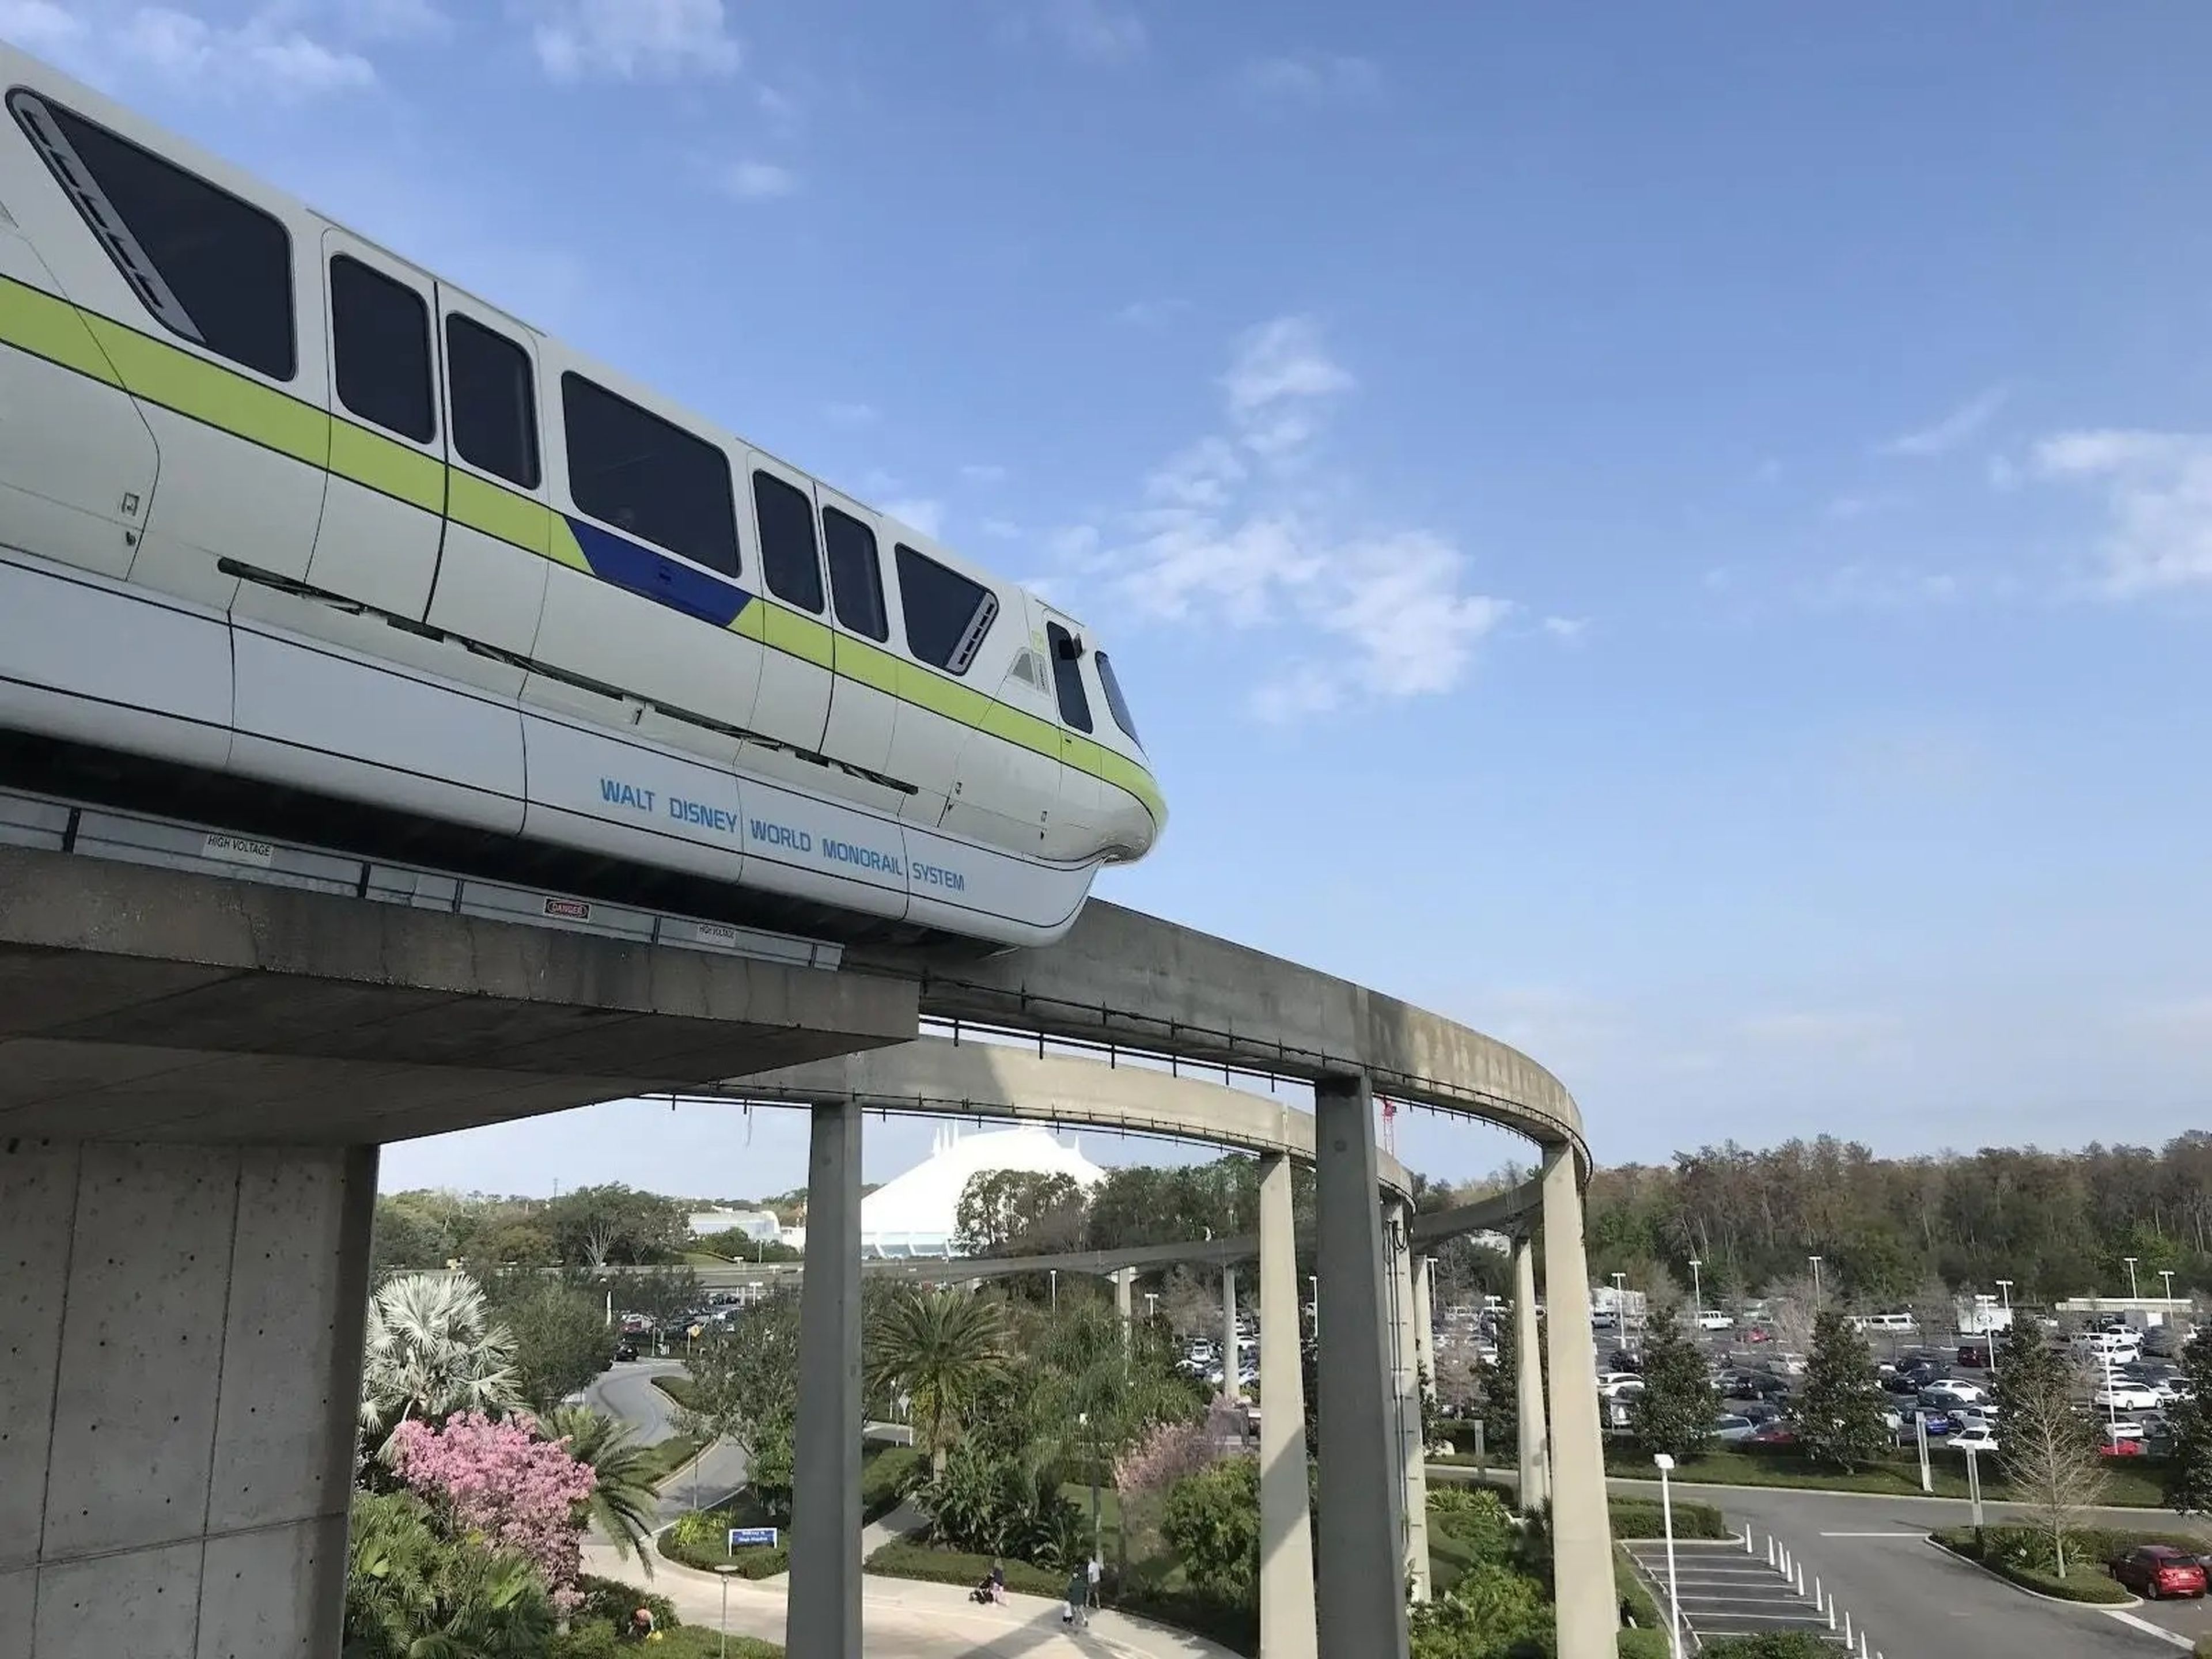 the monorail at disney world in florida